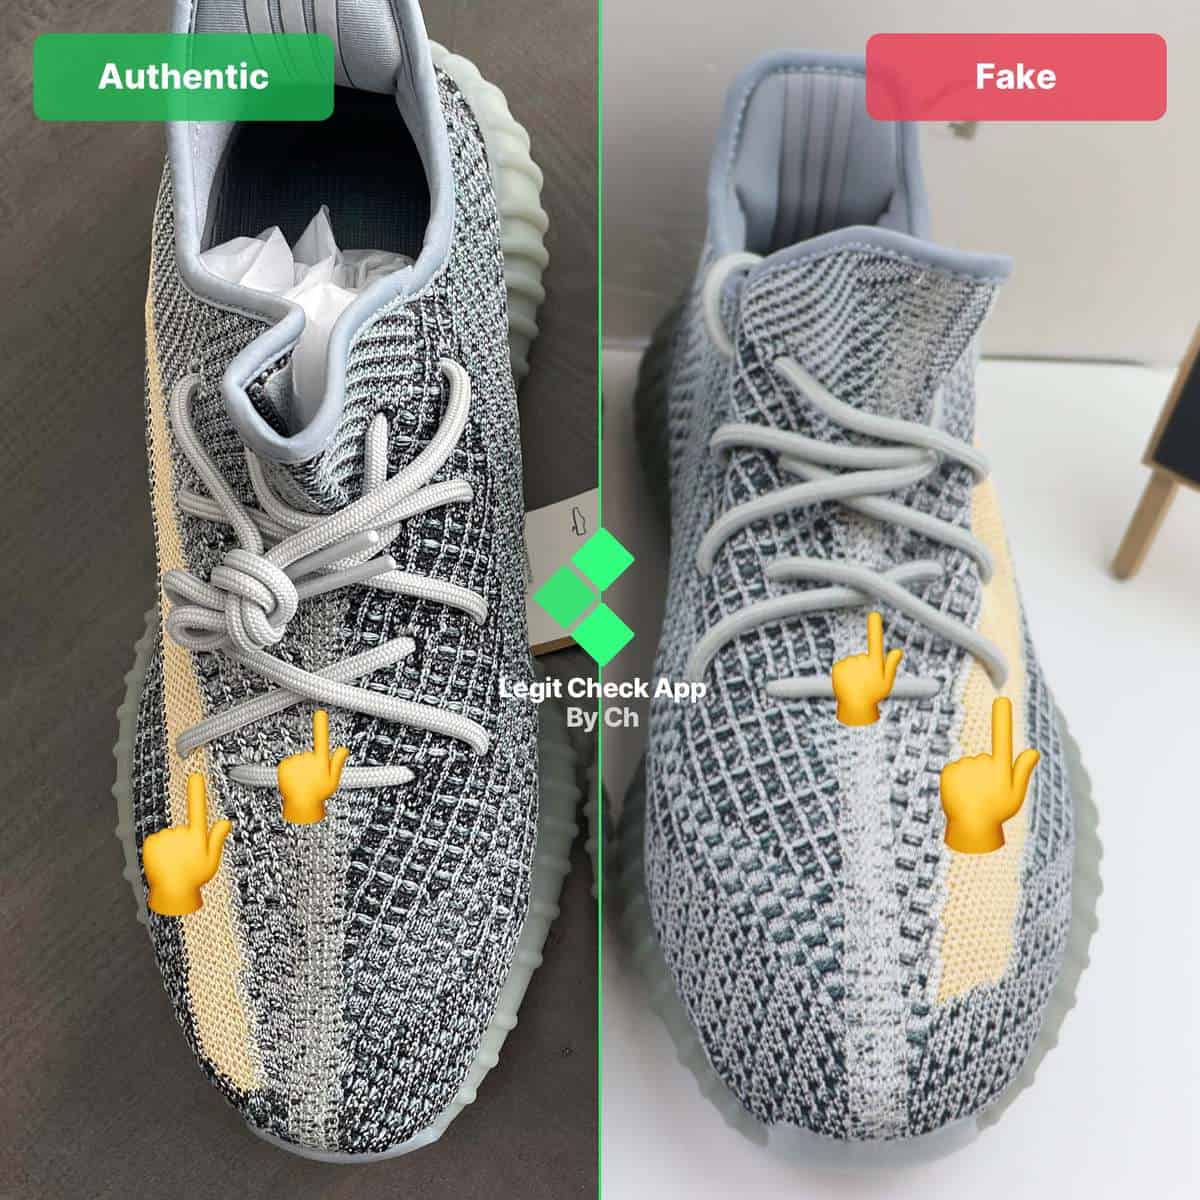 How To Spot Real Vs Fake Yeezy Boost 350 V2 Ash Blue - Legit Check By Ch